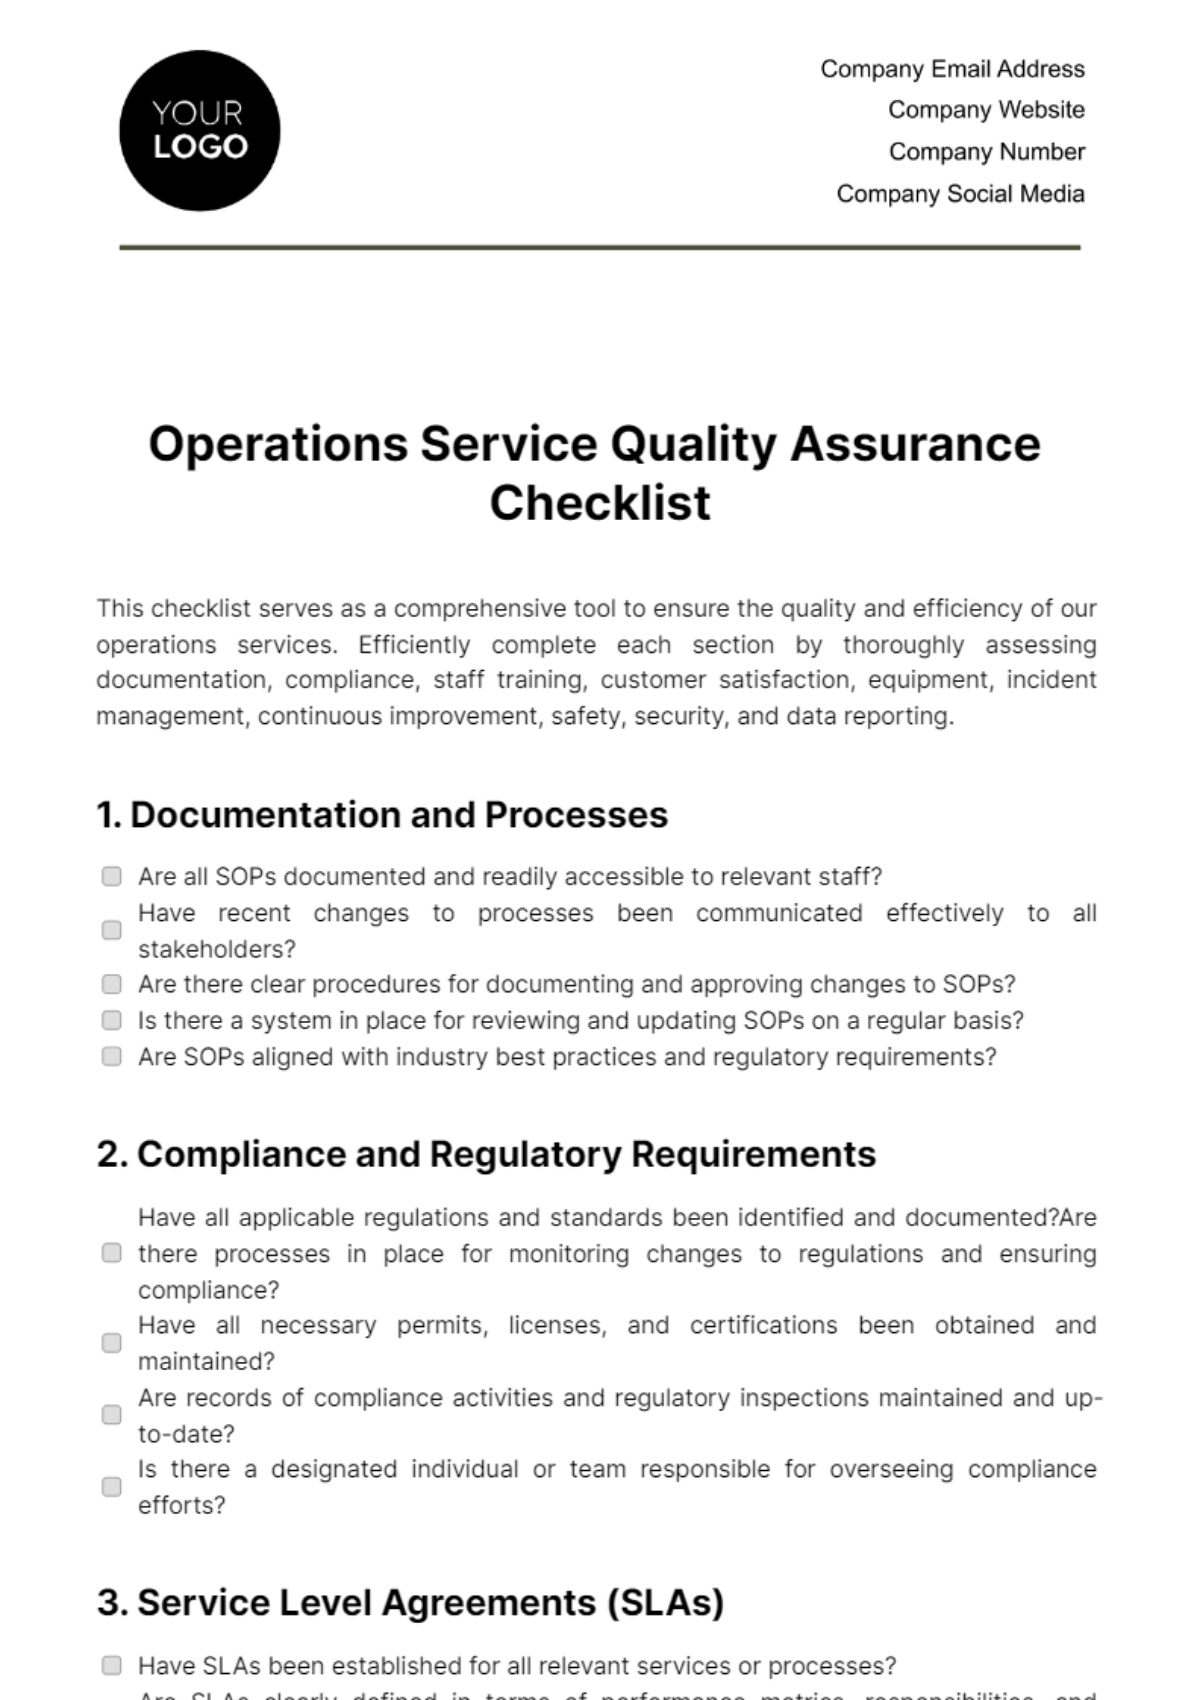 Operations Service Quality Assurance Checklist Template